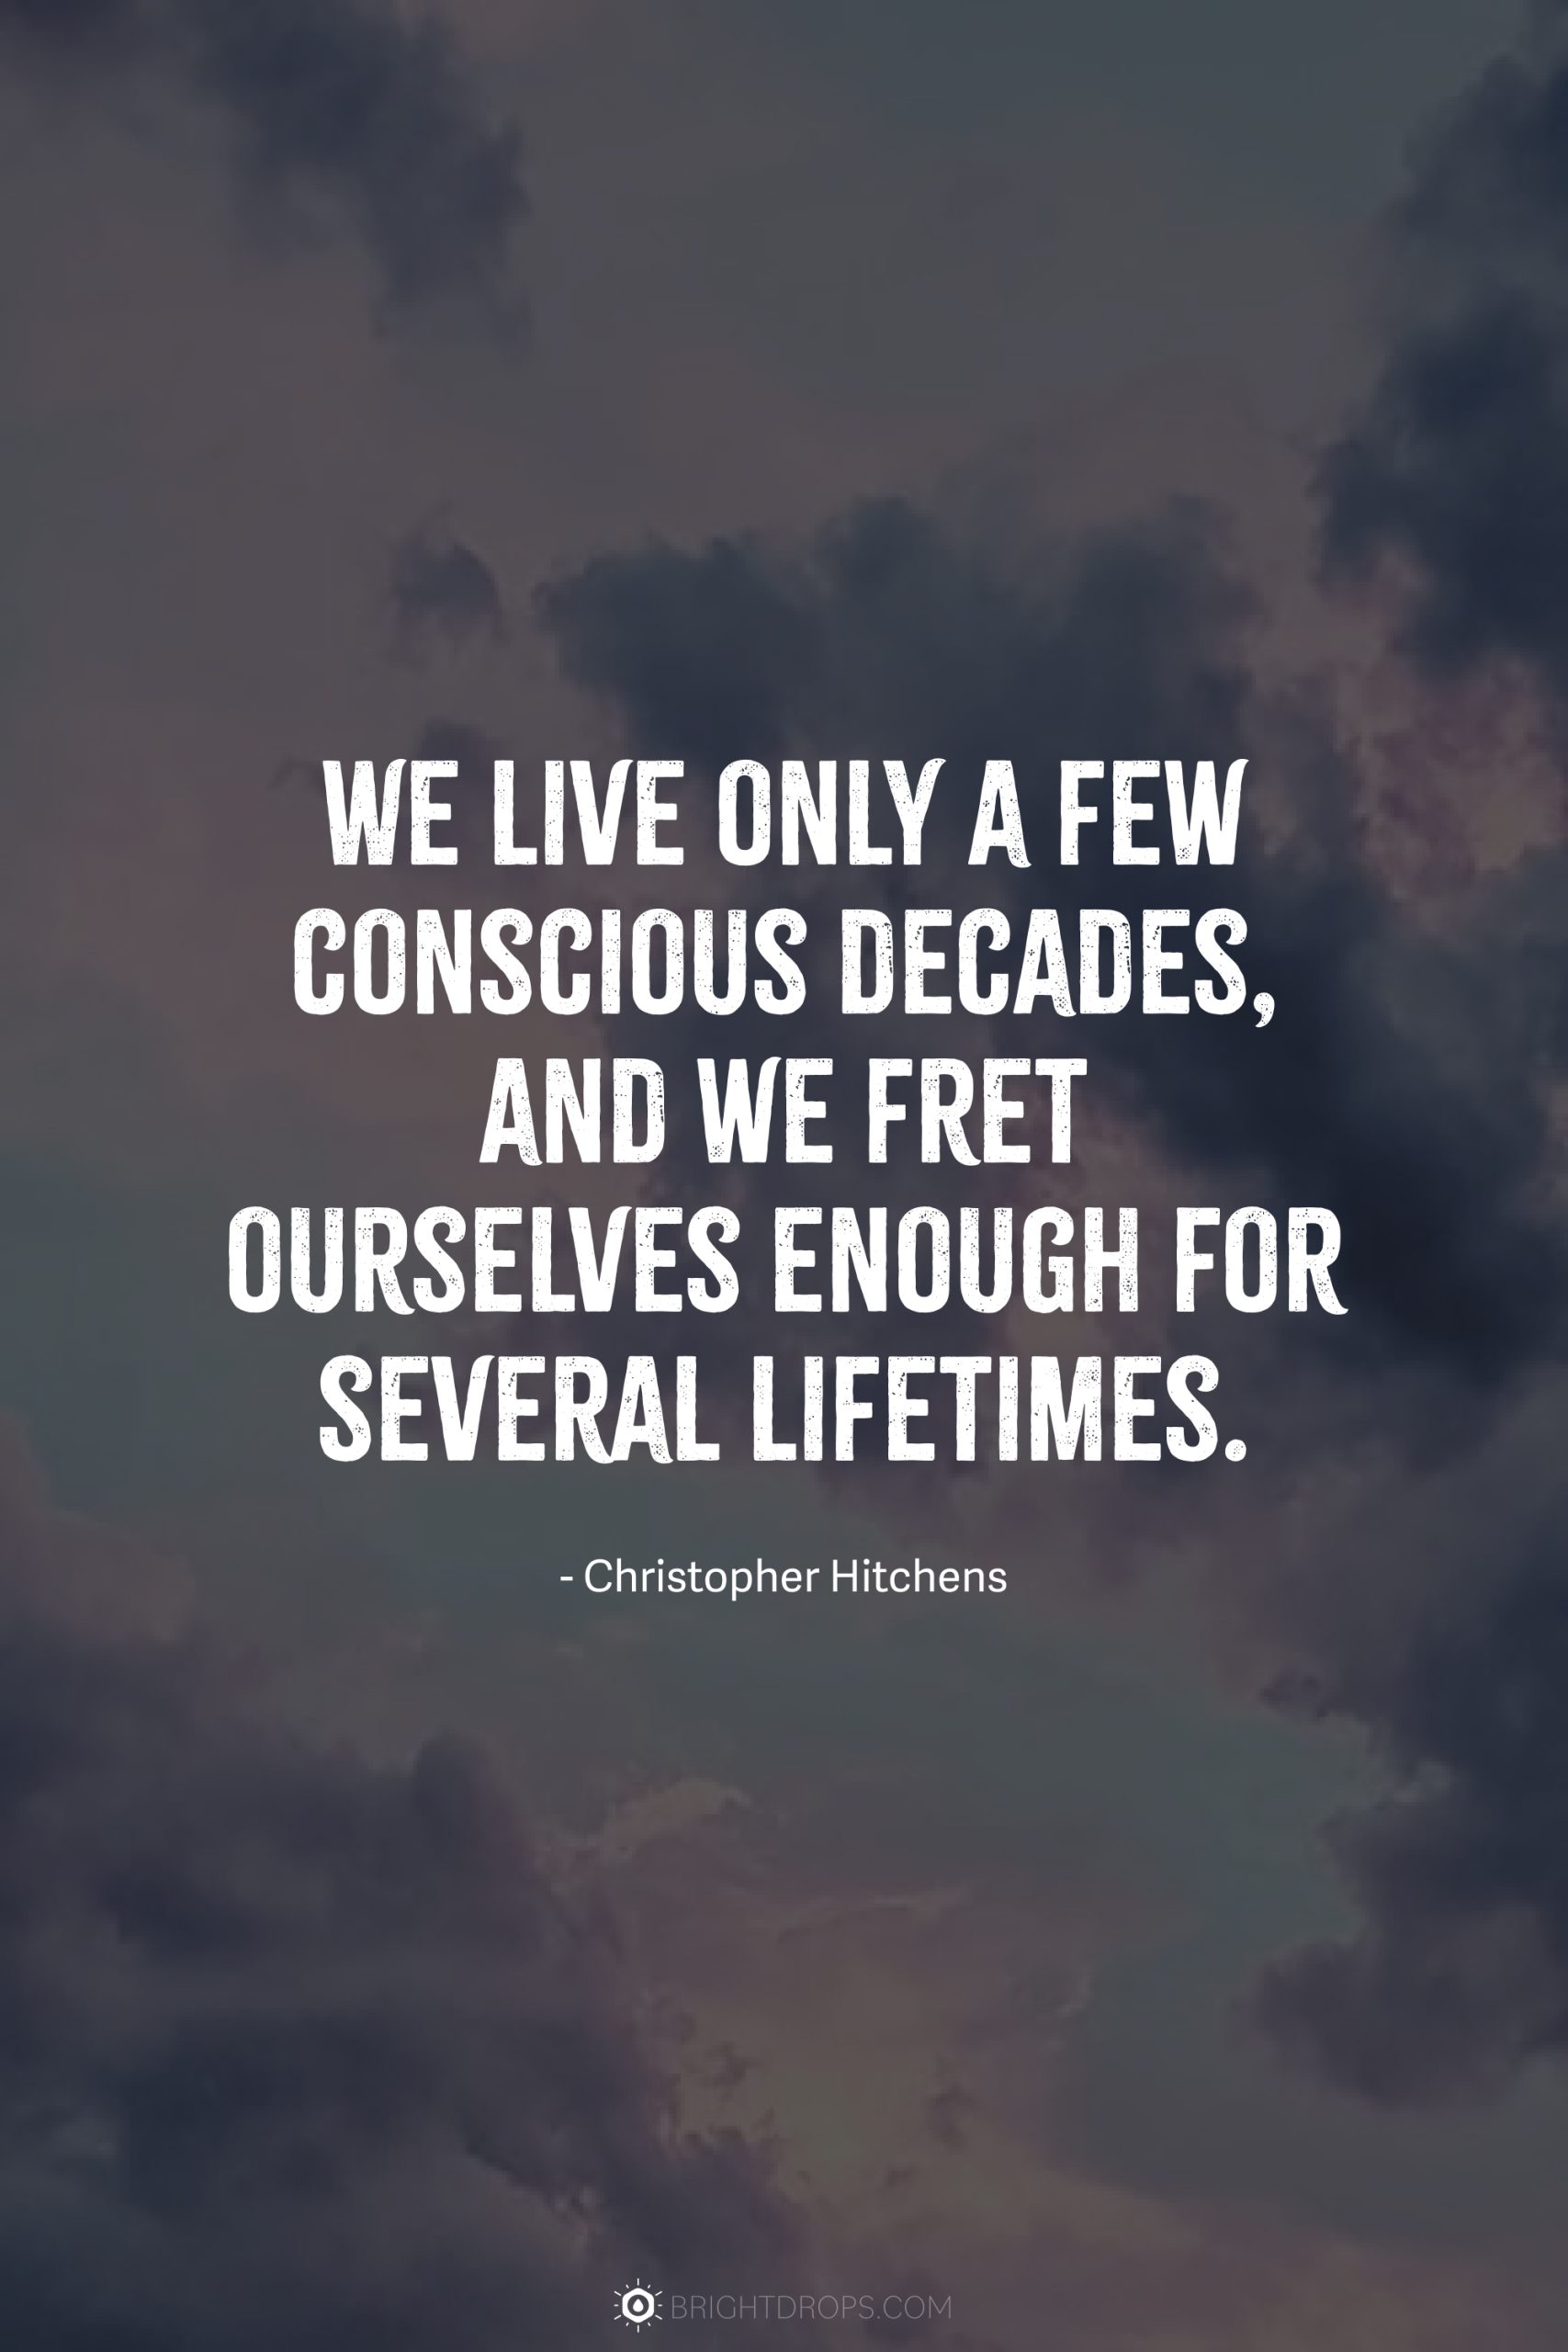 We live only a few conscious decades, and we fret ourselves enough for several lifetimes.